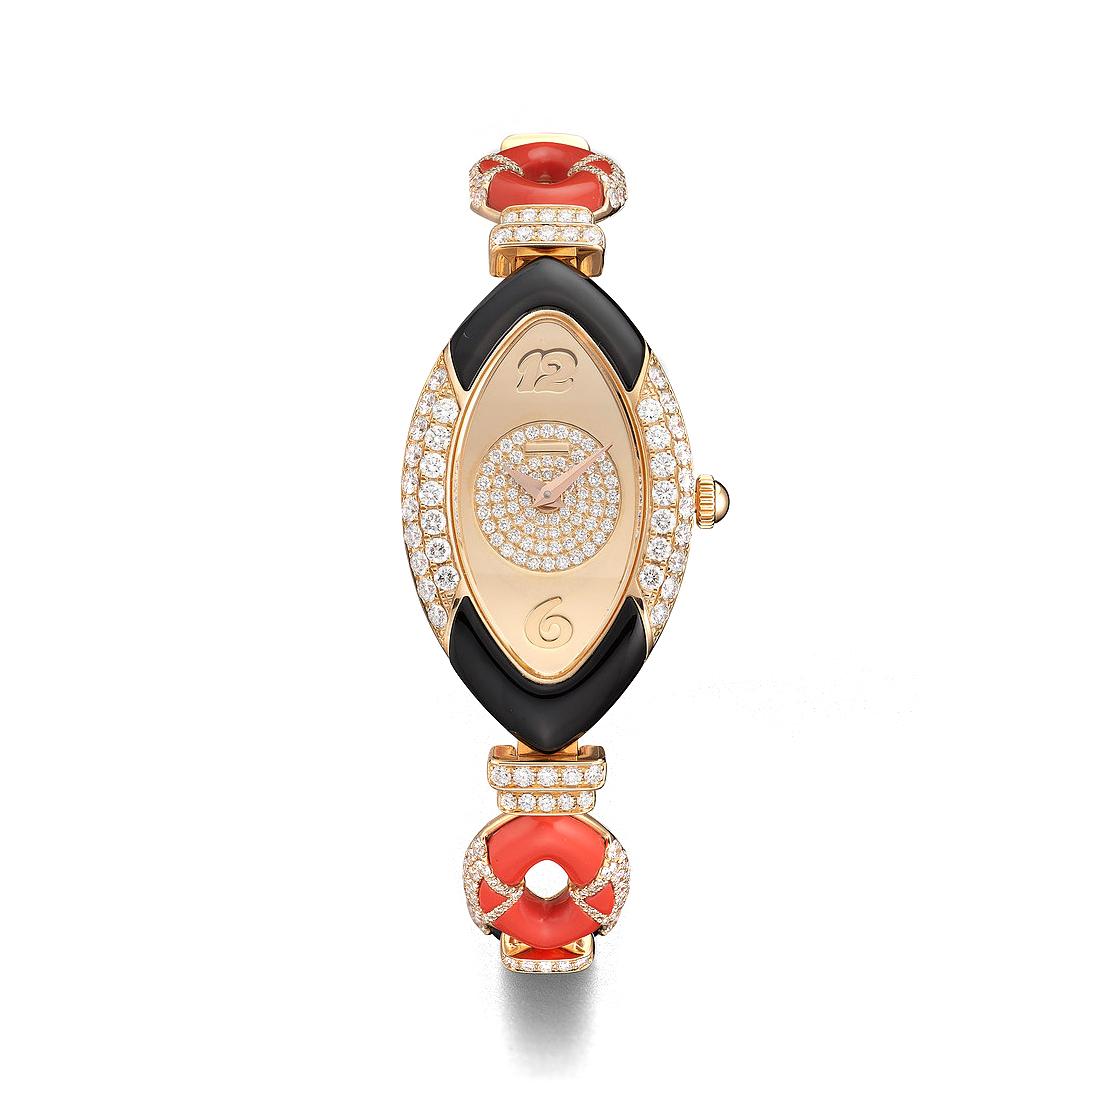 Watch in pink gold 18kt set with 16 coral 7.54 cts, 10 onyx 7.65 cts case dial and bracelet set with 393 diamonds 3.40 cts quartz movement.

We do not guarantee the functioning of this watch.         